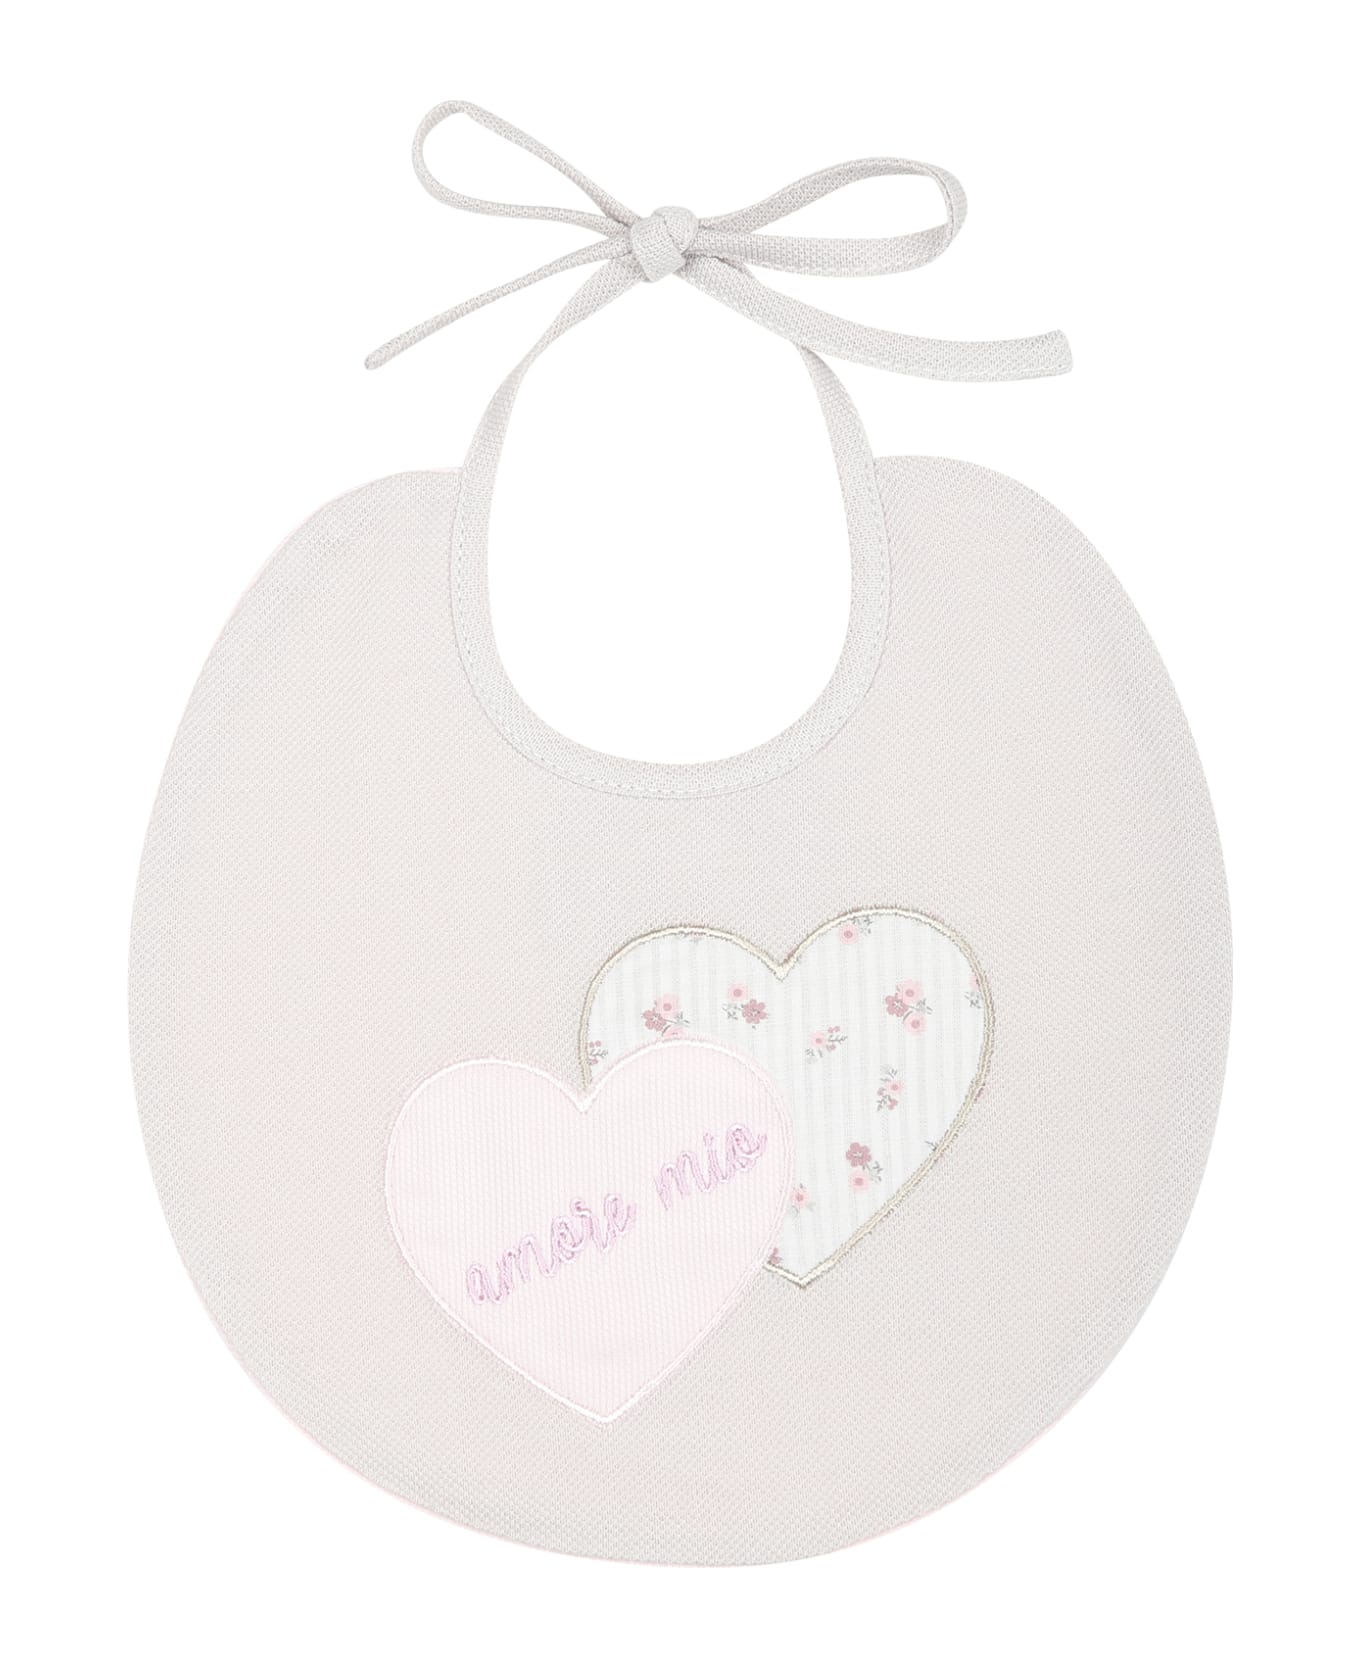 La stupenderia Beige Bib For Baby Girl With Hearts And Writing - Beige アクセサリー＆ギフト